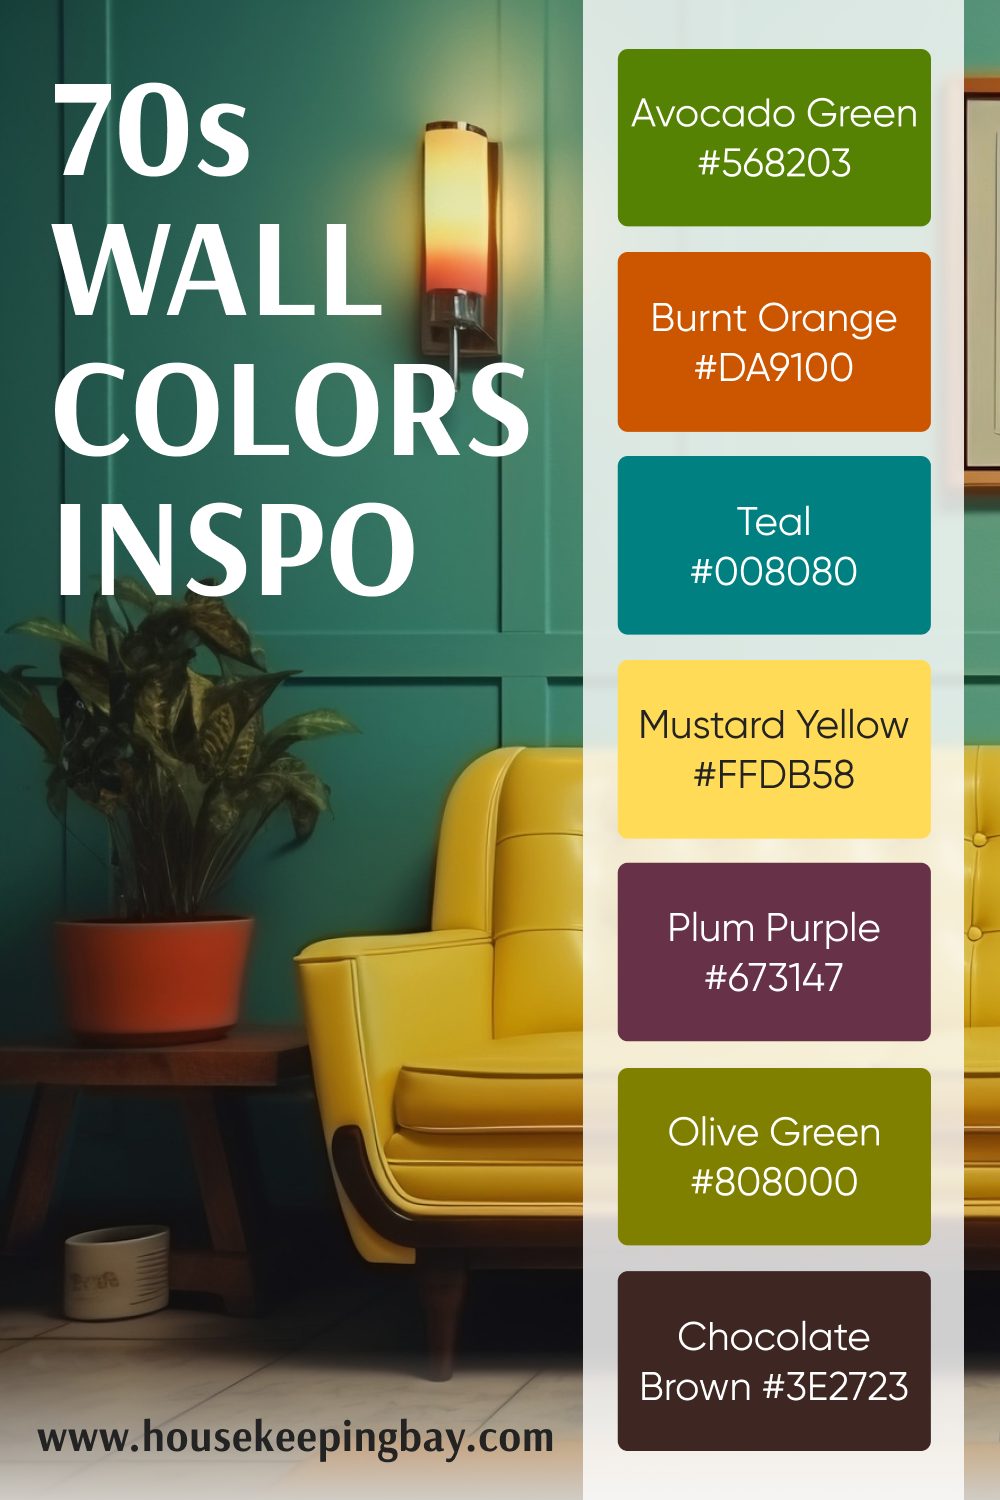 70s wall colors inspo